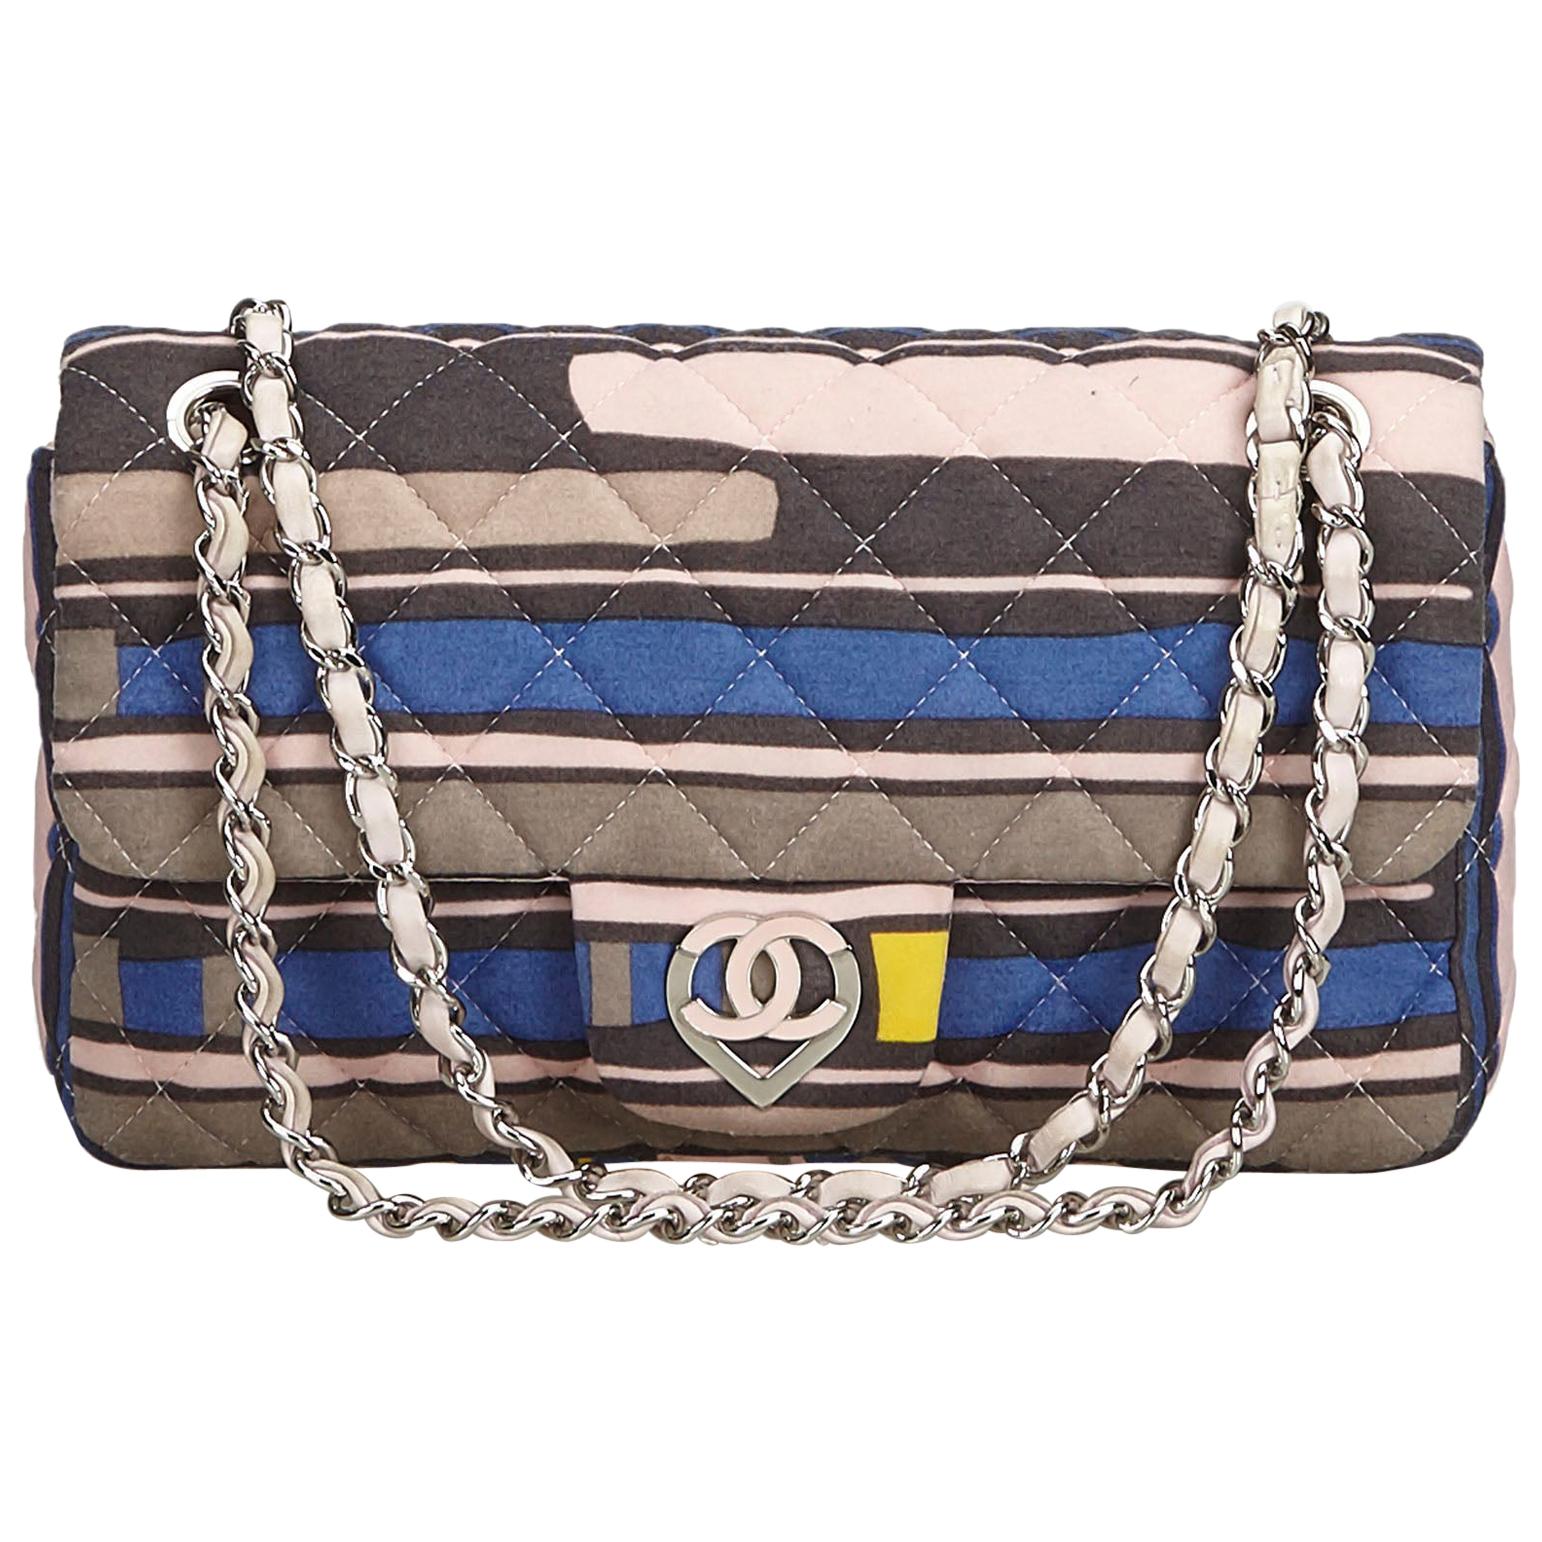 Chanel Cruise heart-shaped CC clasp fabric flap bag 